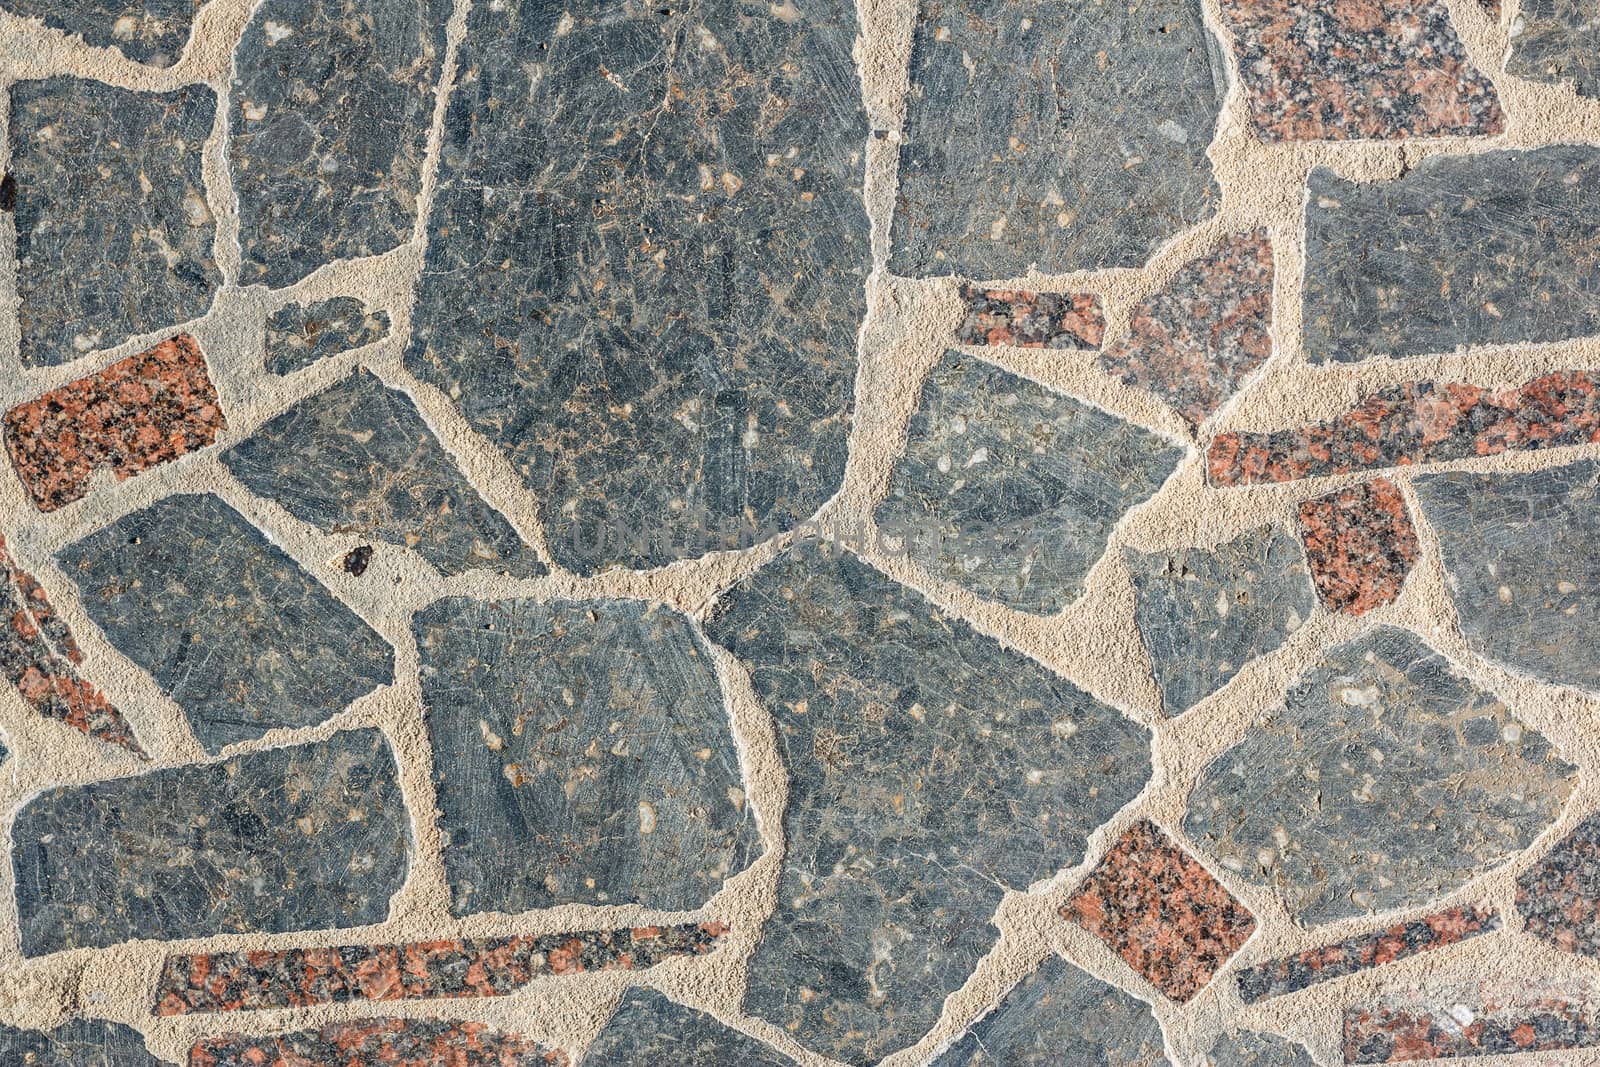 Pieces of granite tiles stacked on the street, shot in the afternoon